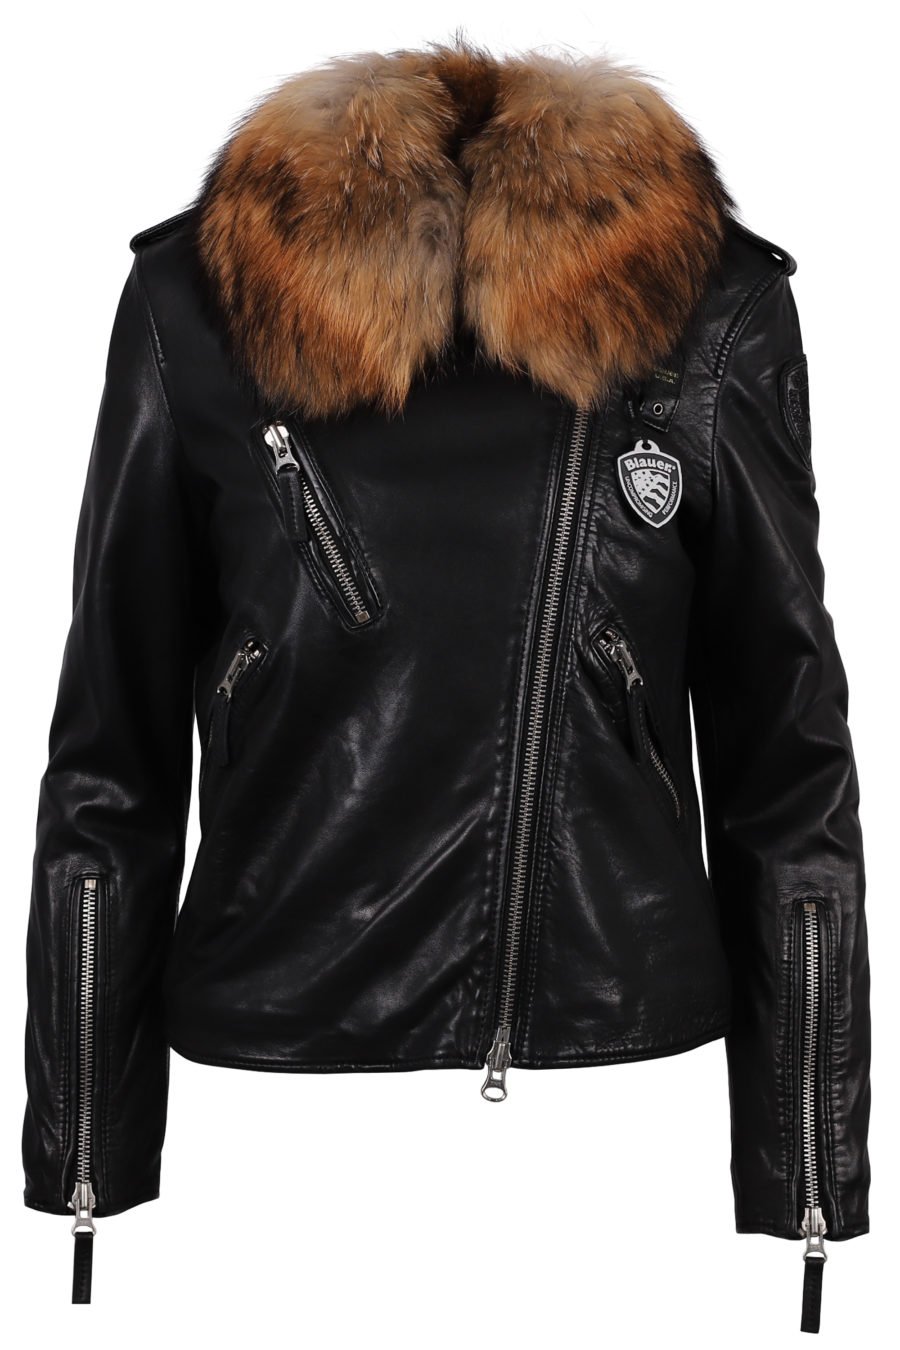 Leather jacket with fur collar - IMG 1164